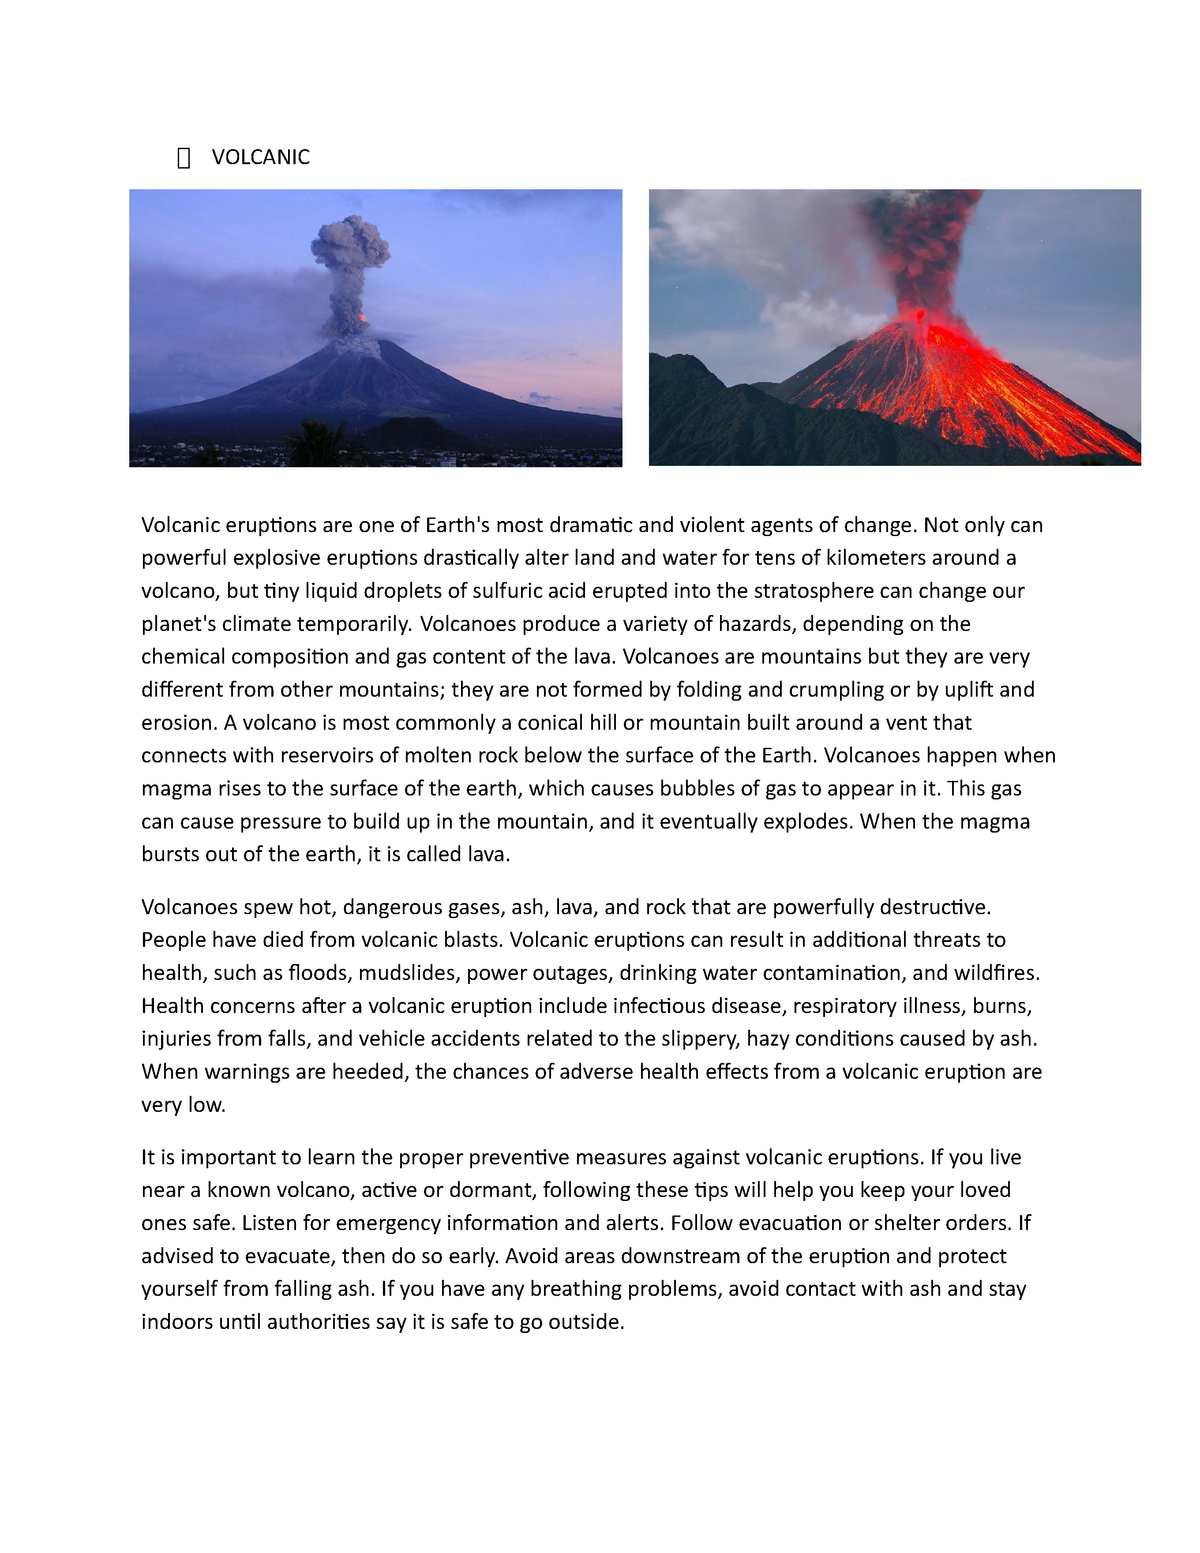 write an essay about volcano